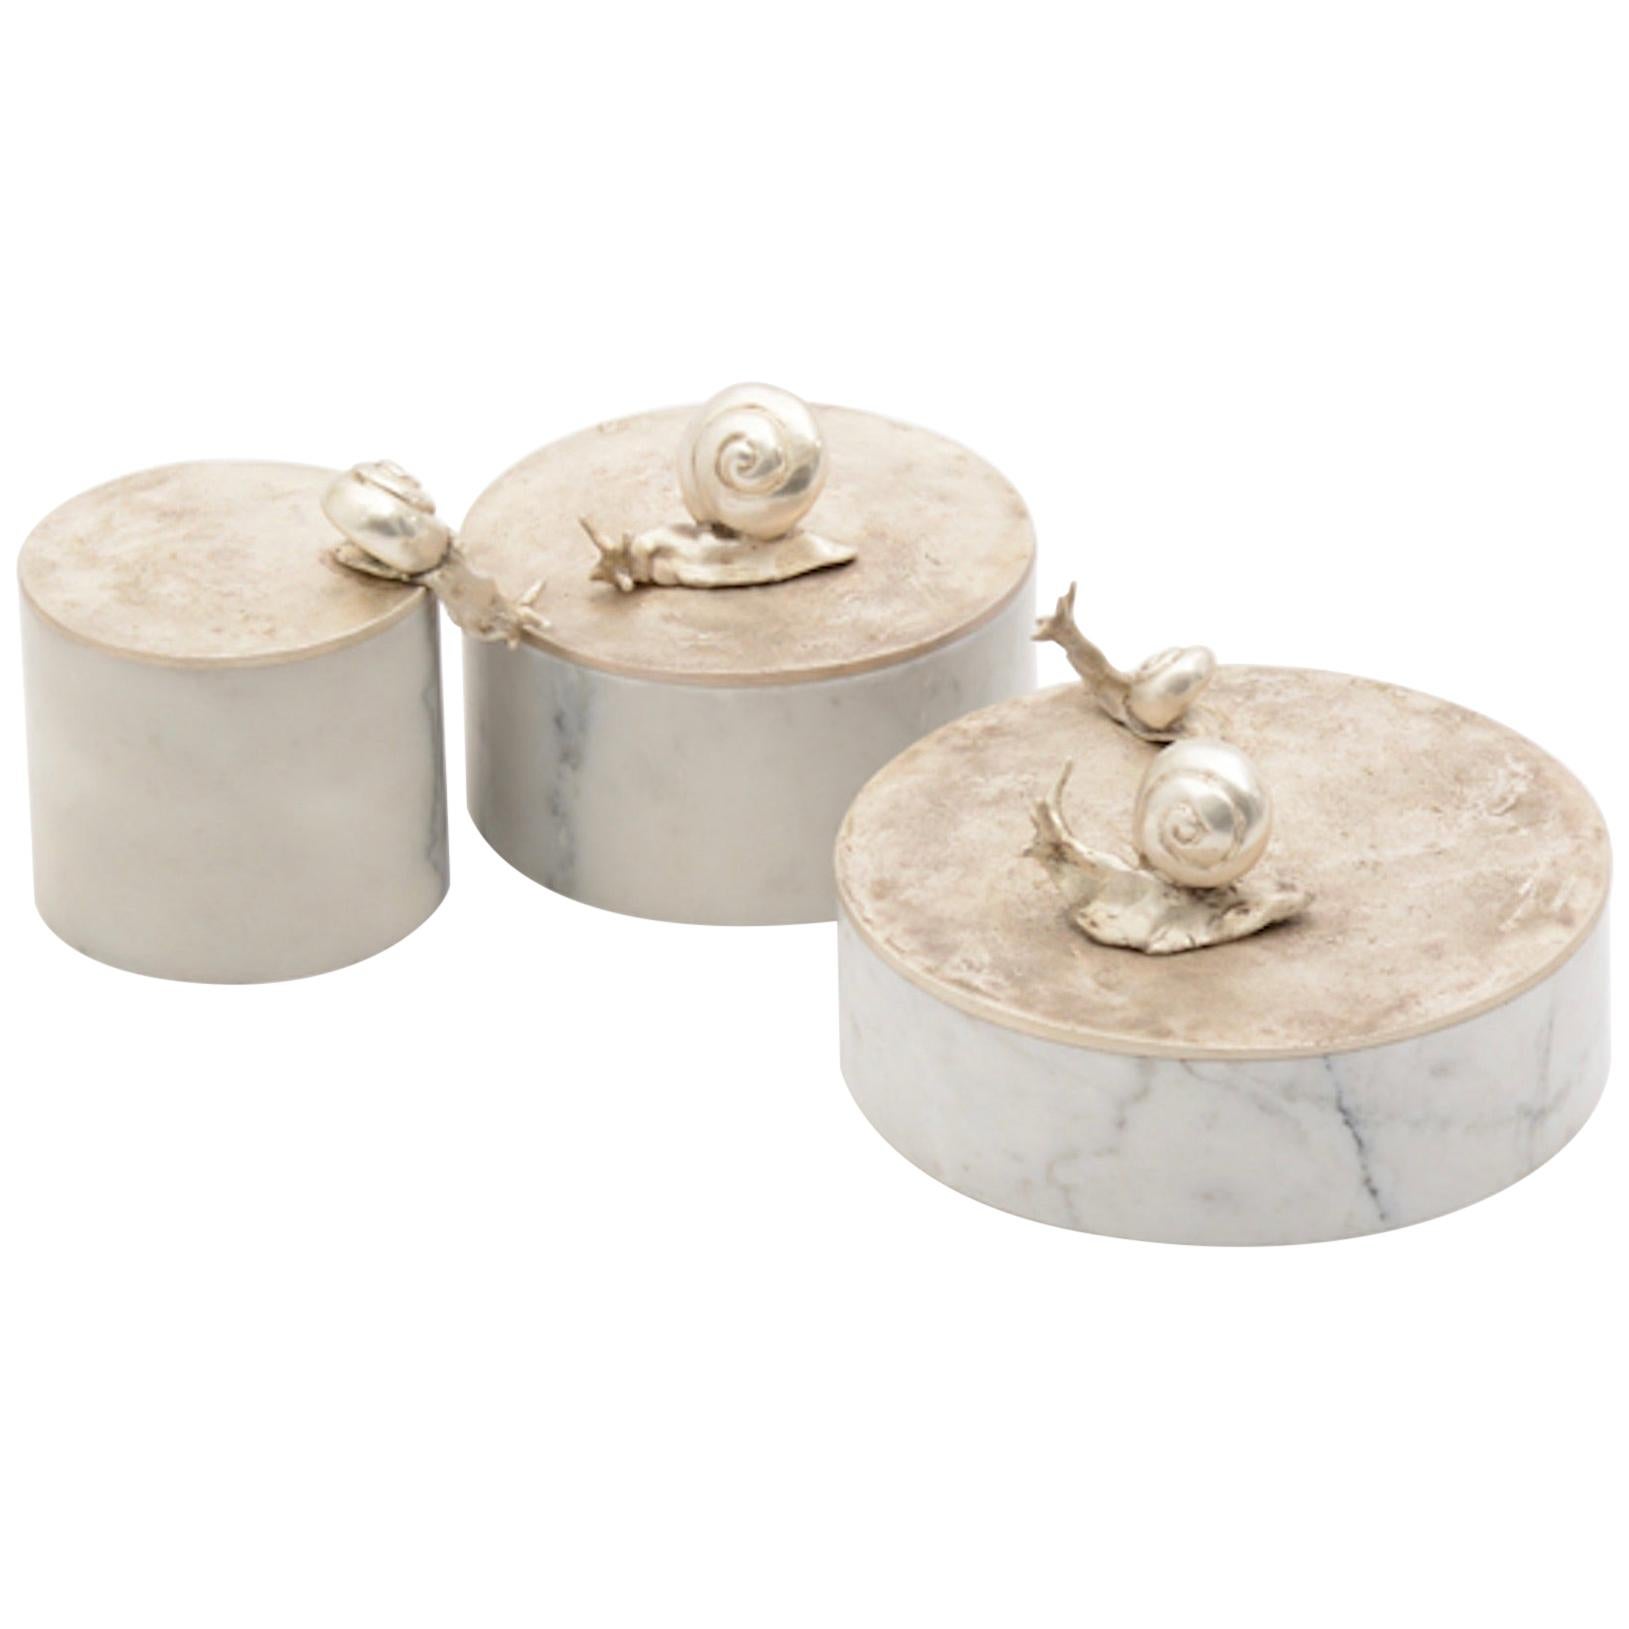 Caracol Keepsake Box Set of 3 Silver Bronze and White Marble from Elan Atelier